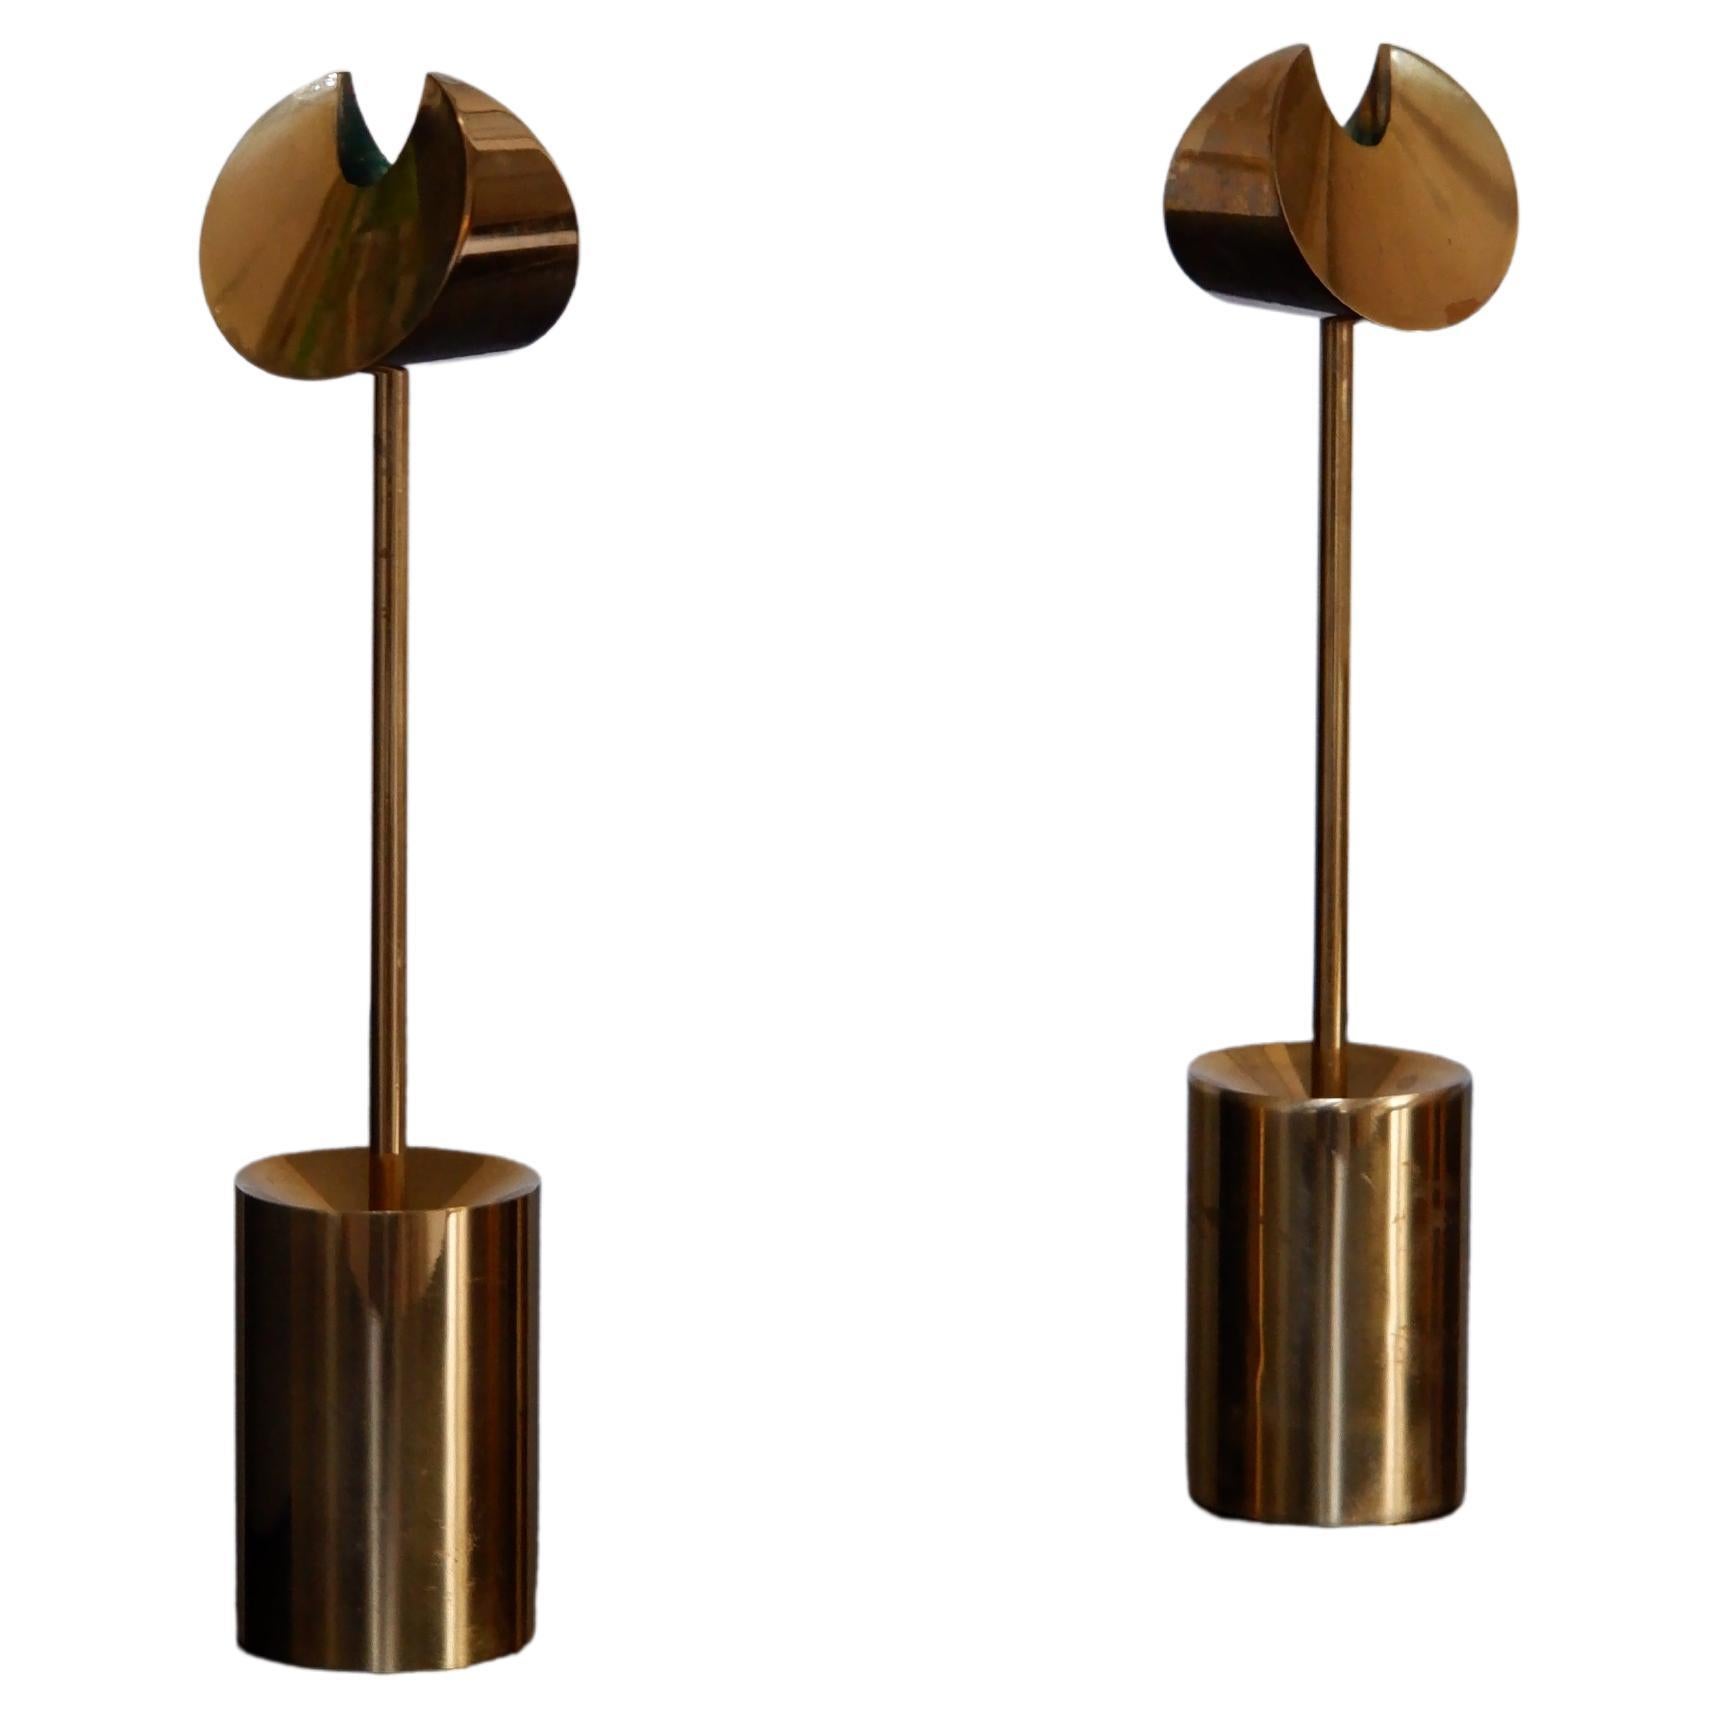 Pierre Forssell Pair of Aniara Candel Stick Holders, Skultuna, circa 1970 For Sale